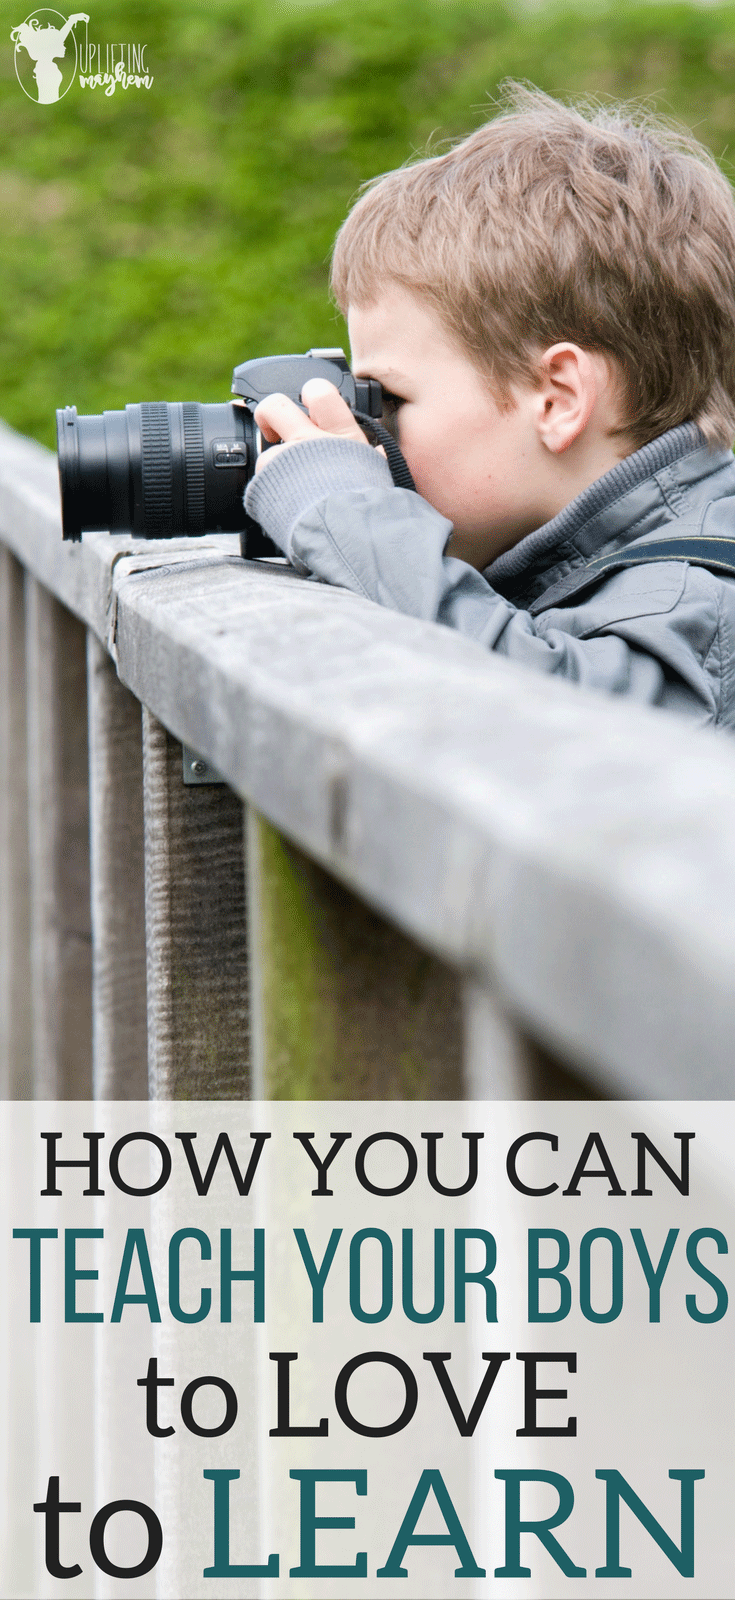 How you can Teach your boys to LOVE TO LEARN